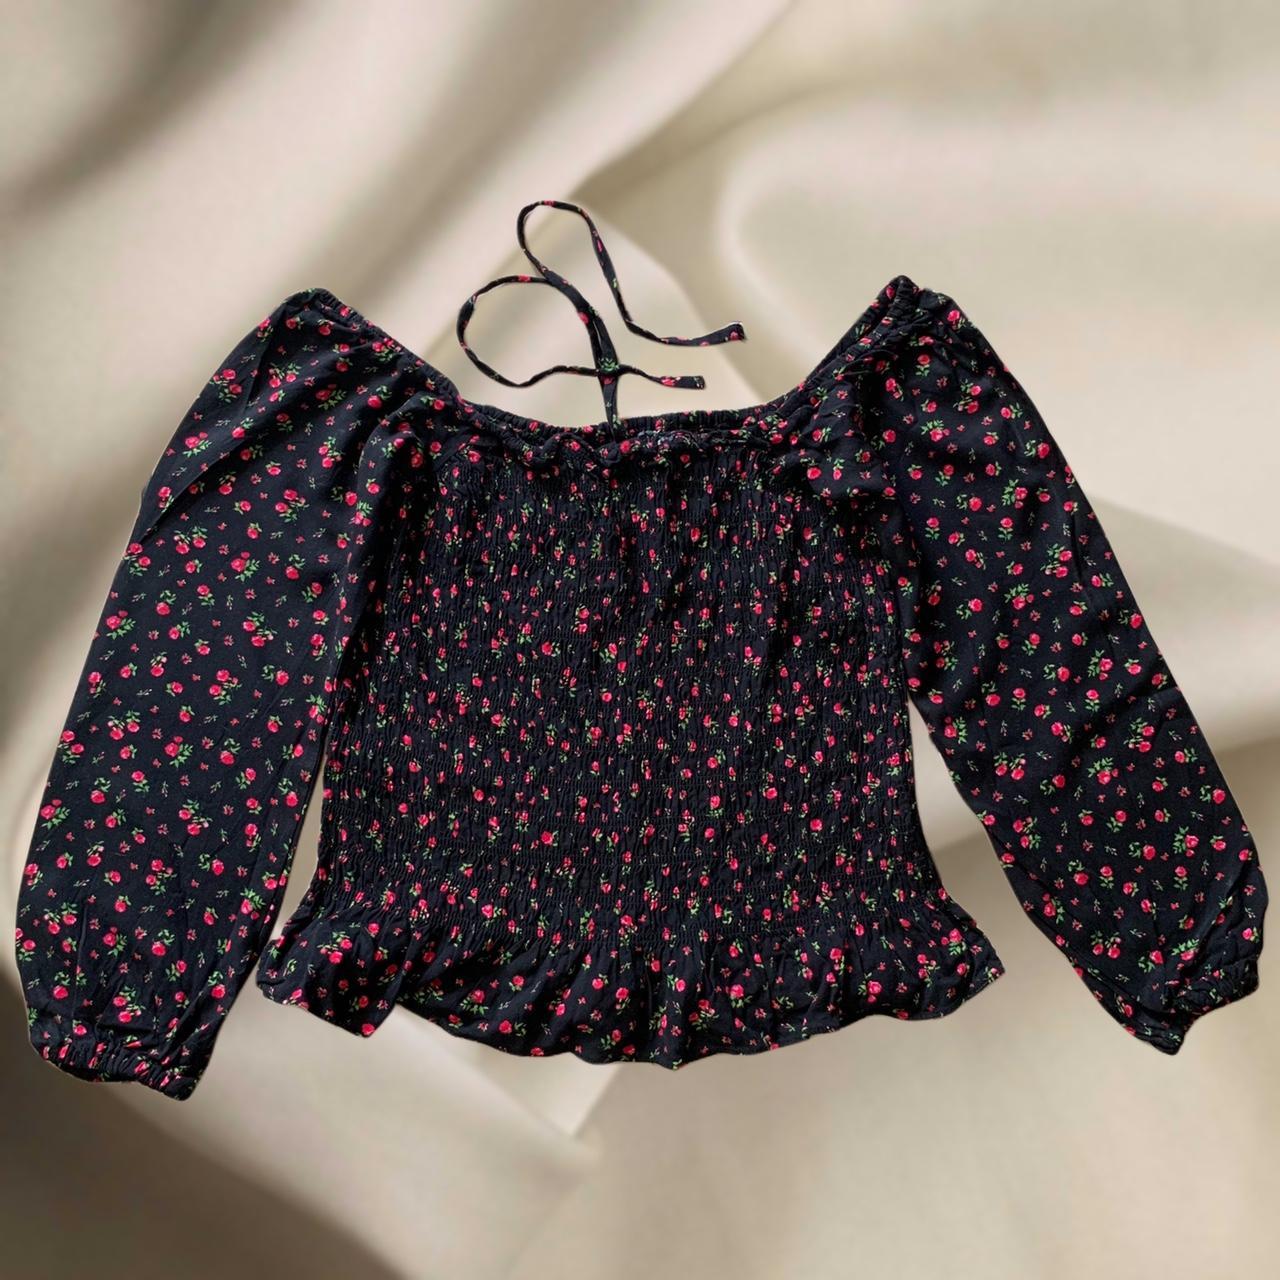 Women's Black and Pink Blouse | Depop